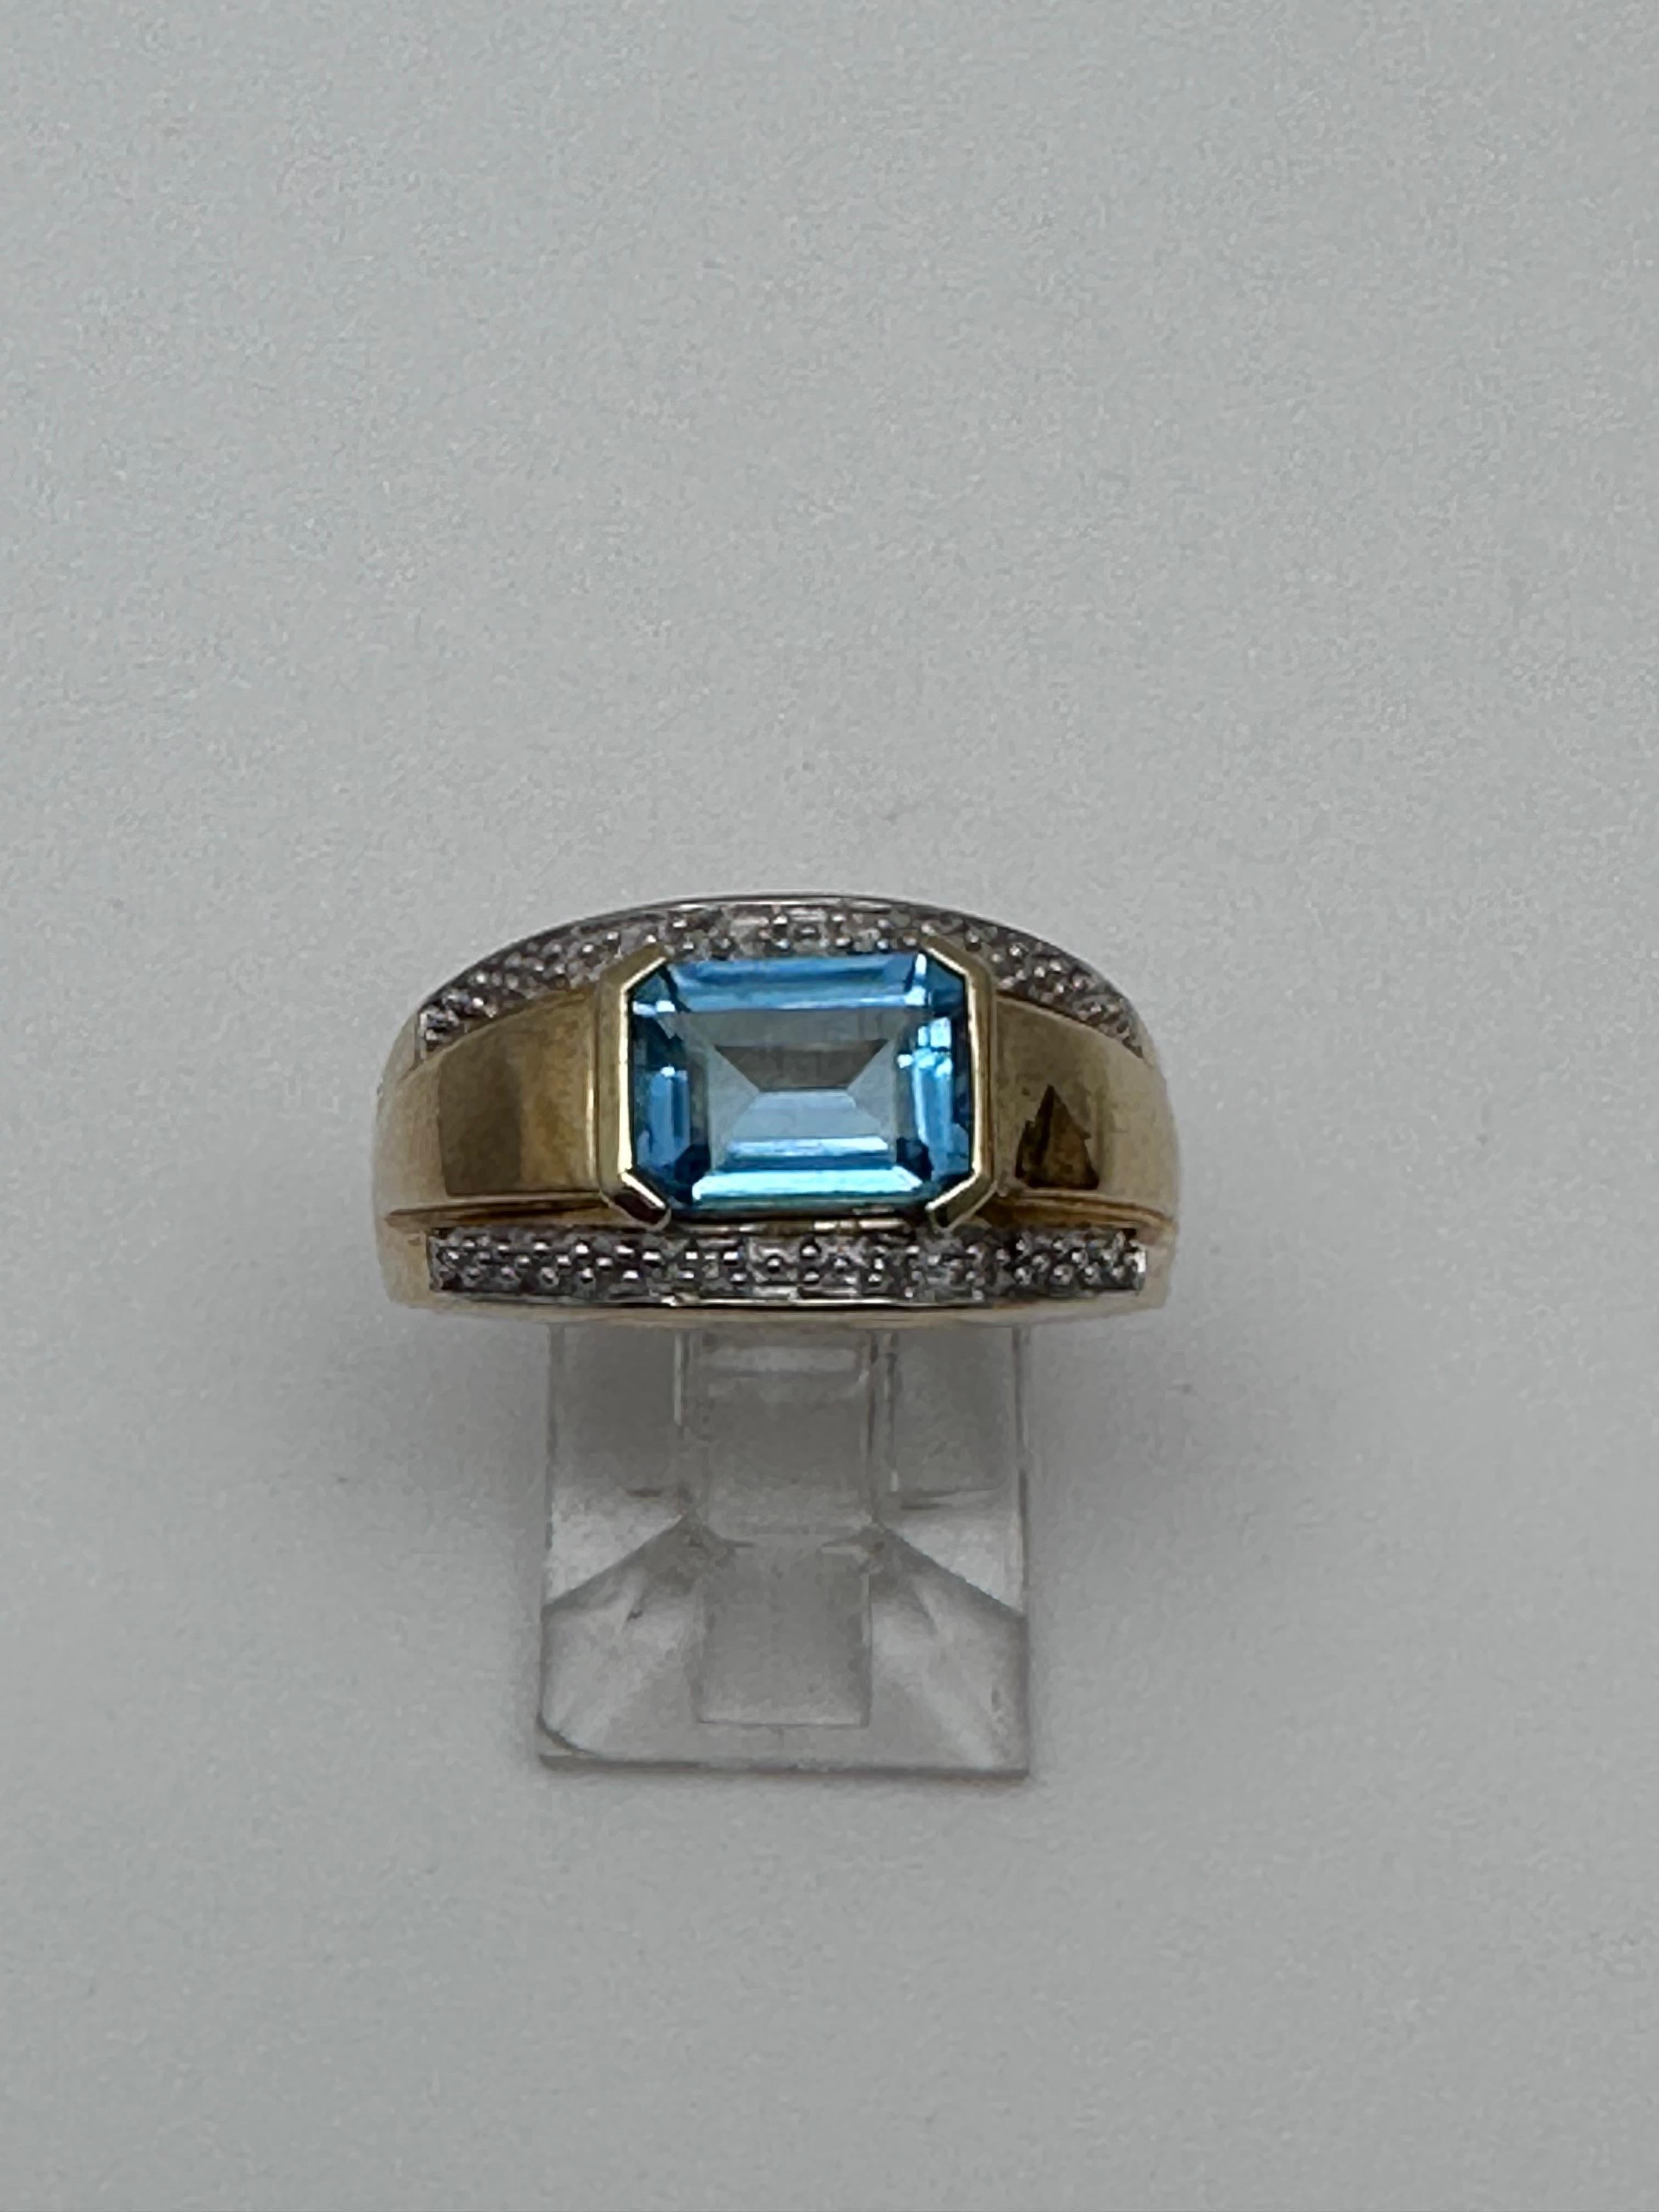 10k Yellow Gold 6mm x 8mm Emerald Cut Blue Topaz Diamond Ring Size 7 In New Condition For Sale In Las Vegas, NV